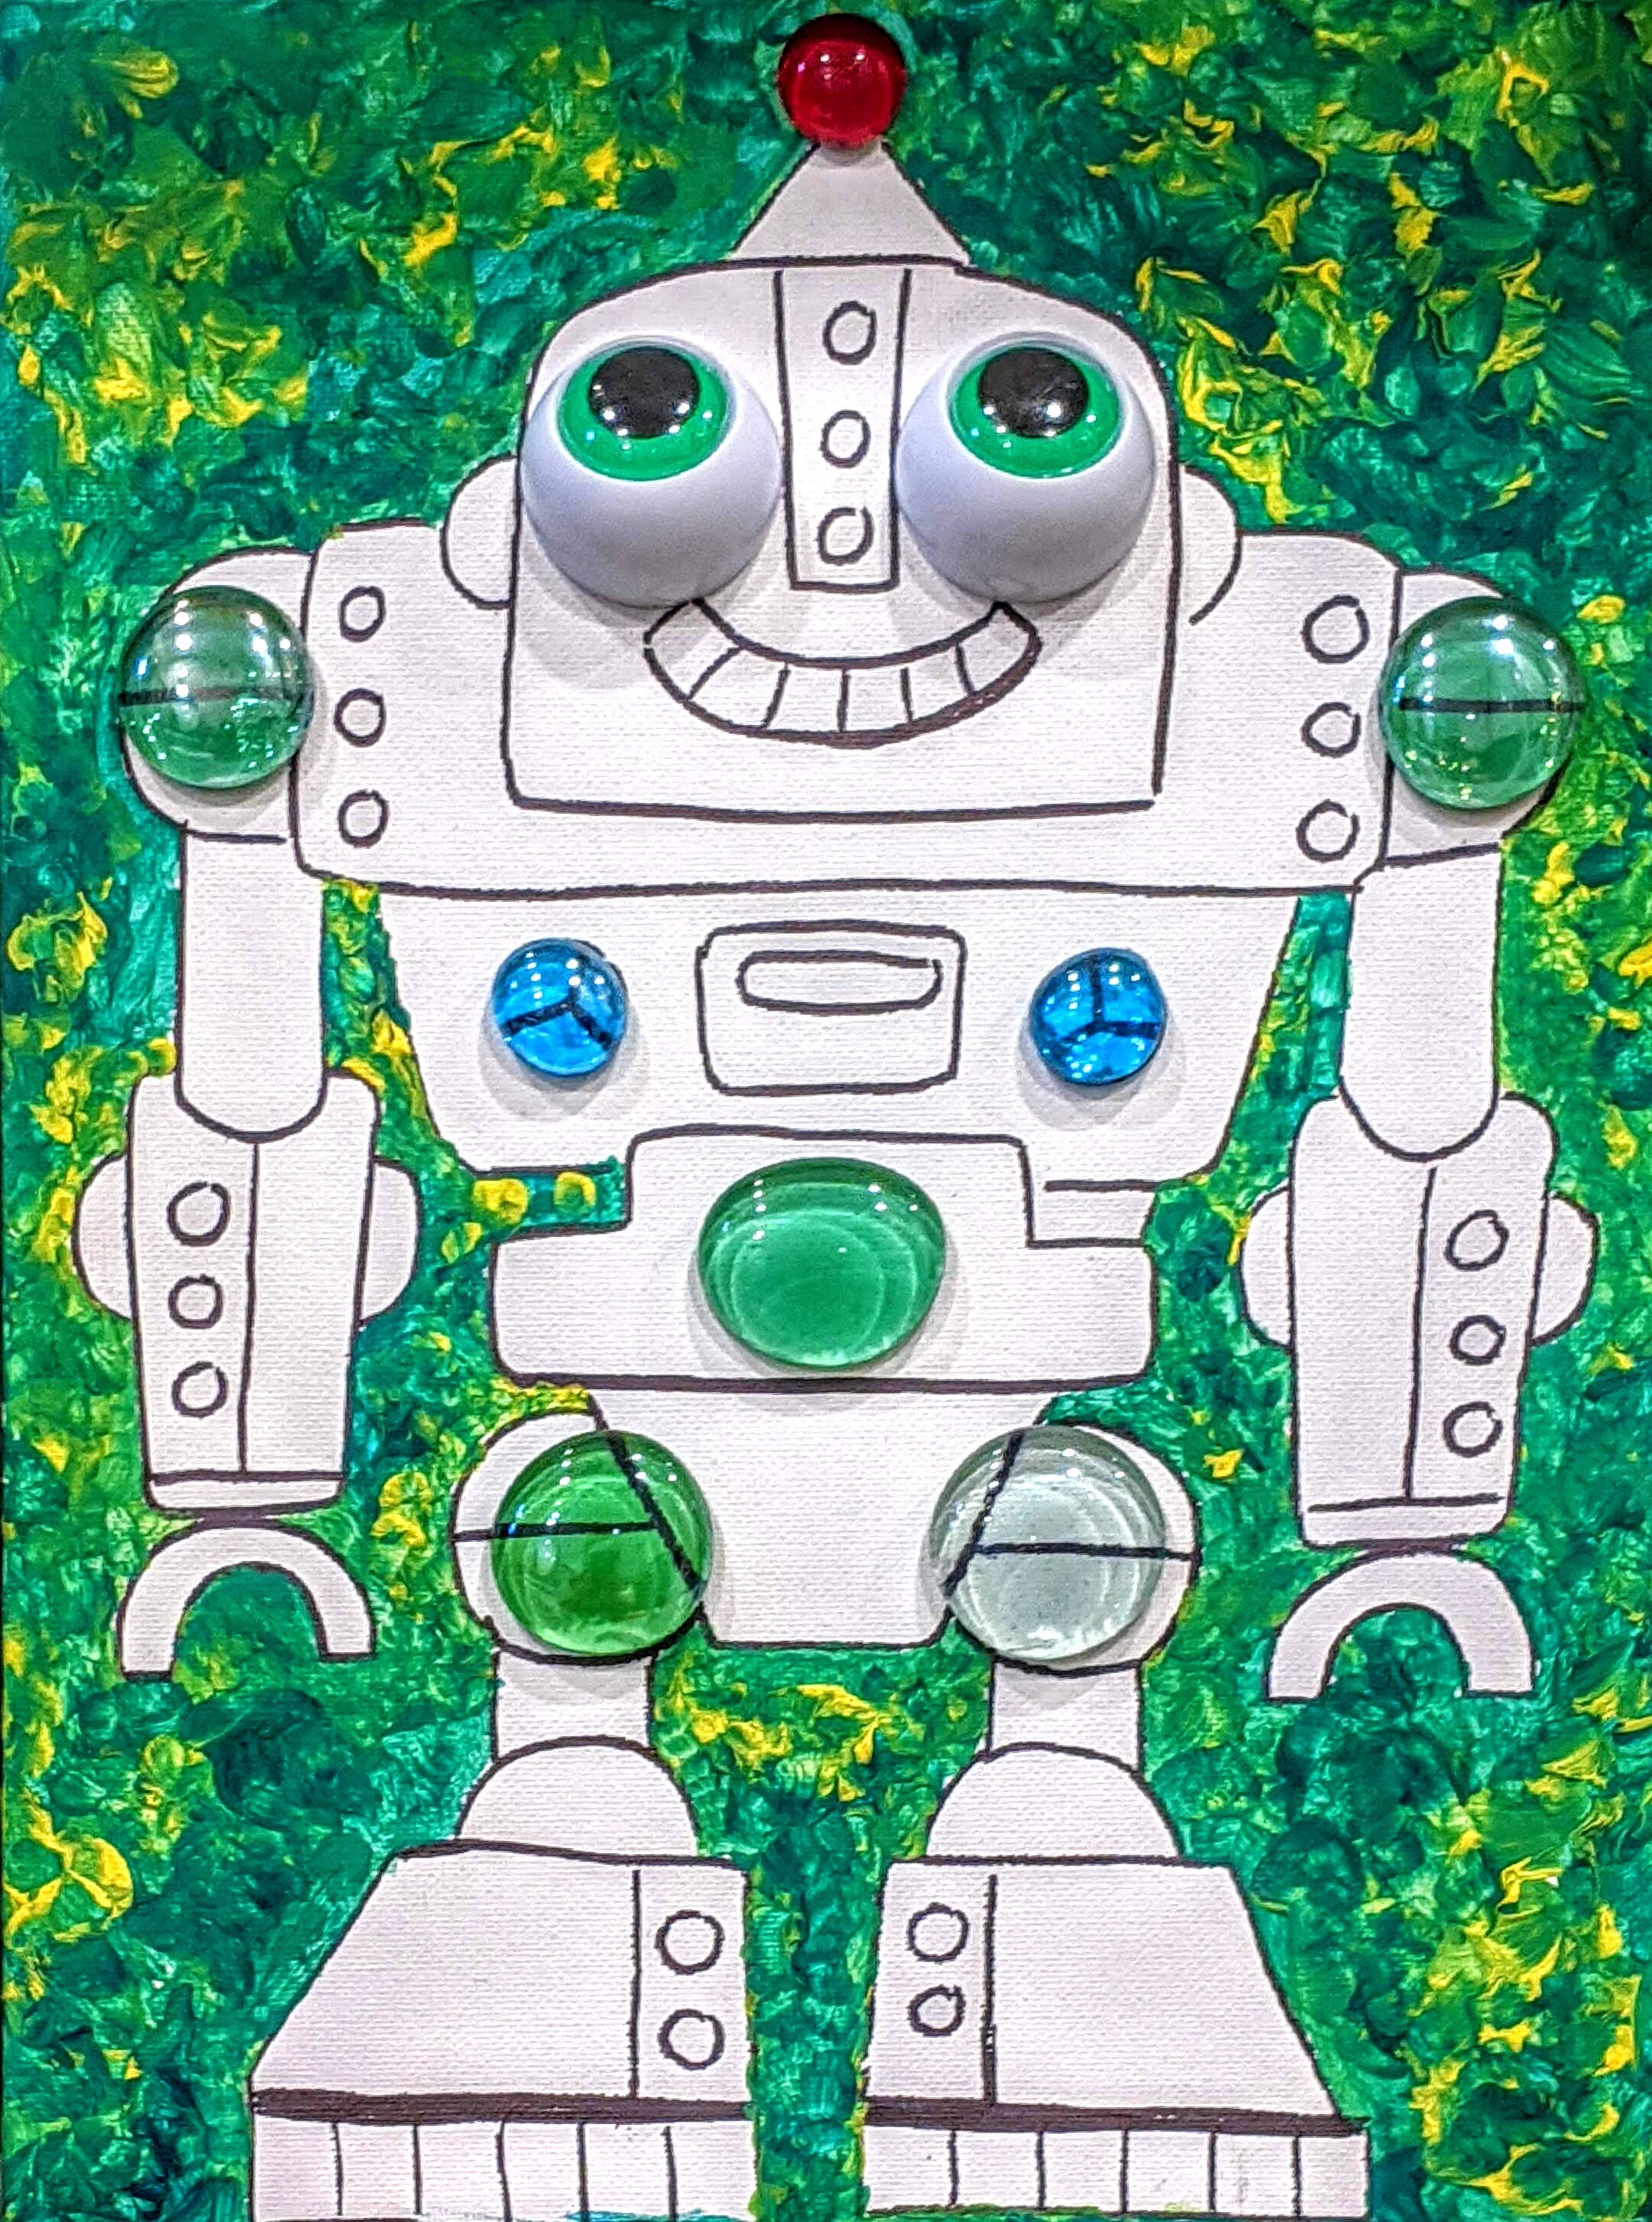 DIY Mosaic Wall Art Painting with crystal. Robot - sparkling mosaic,  painting for the fun time kids and adult together